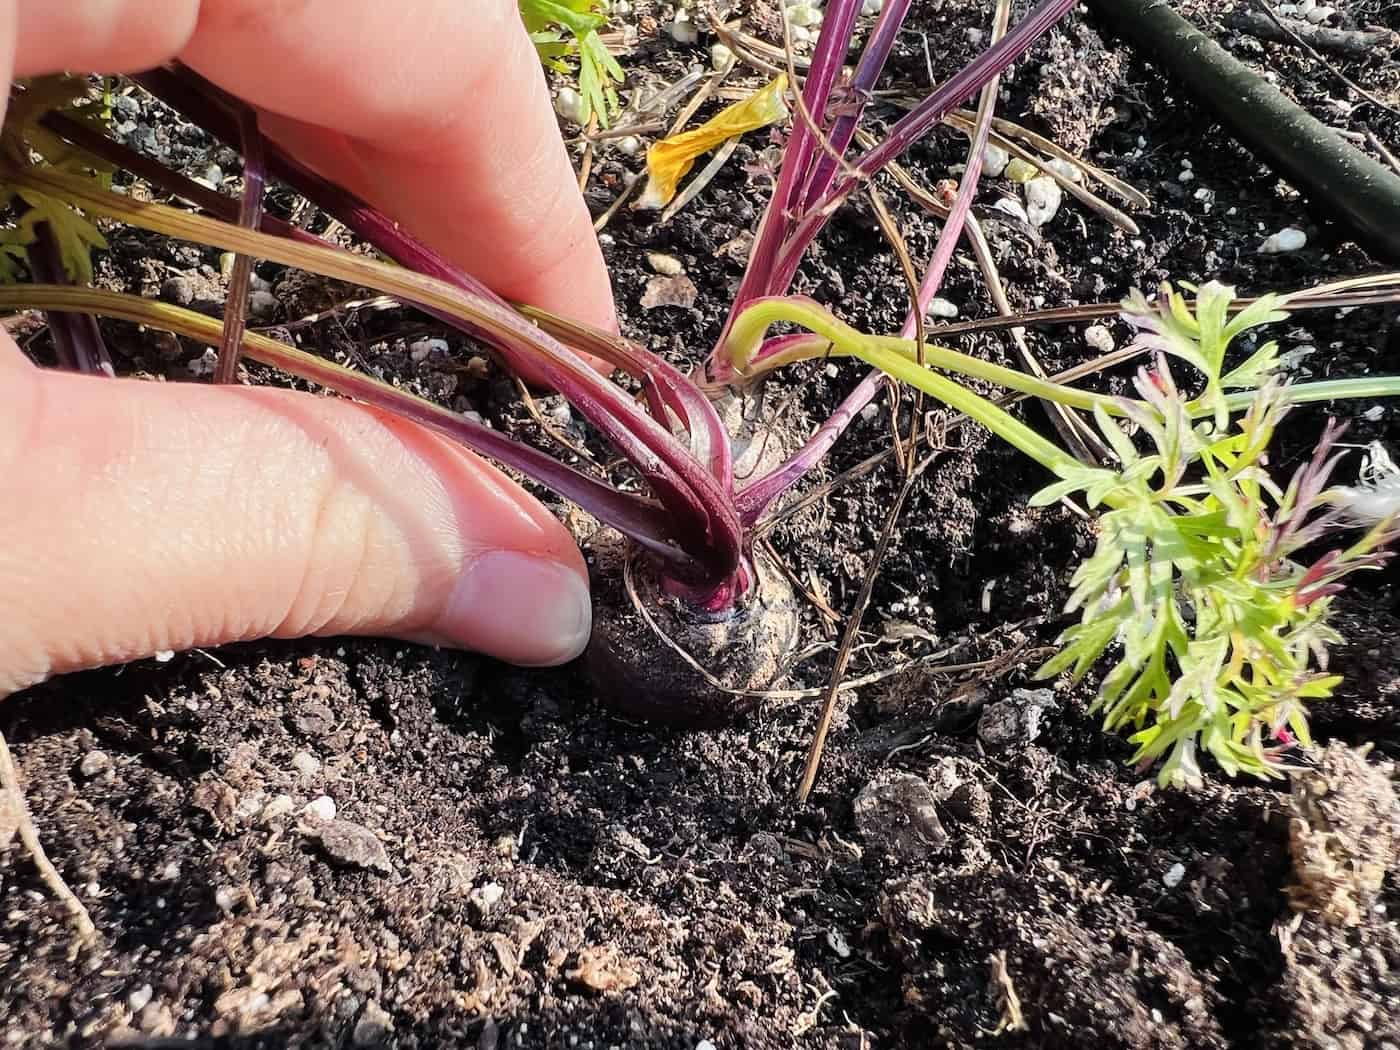 Top of a black purple carrot growing in the garden